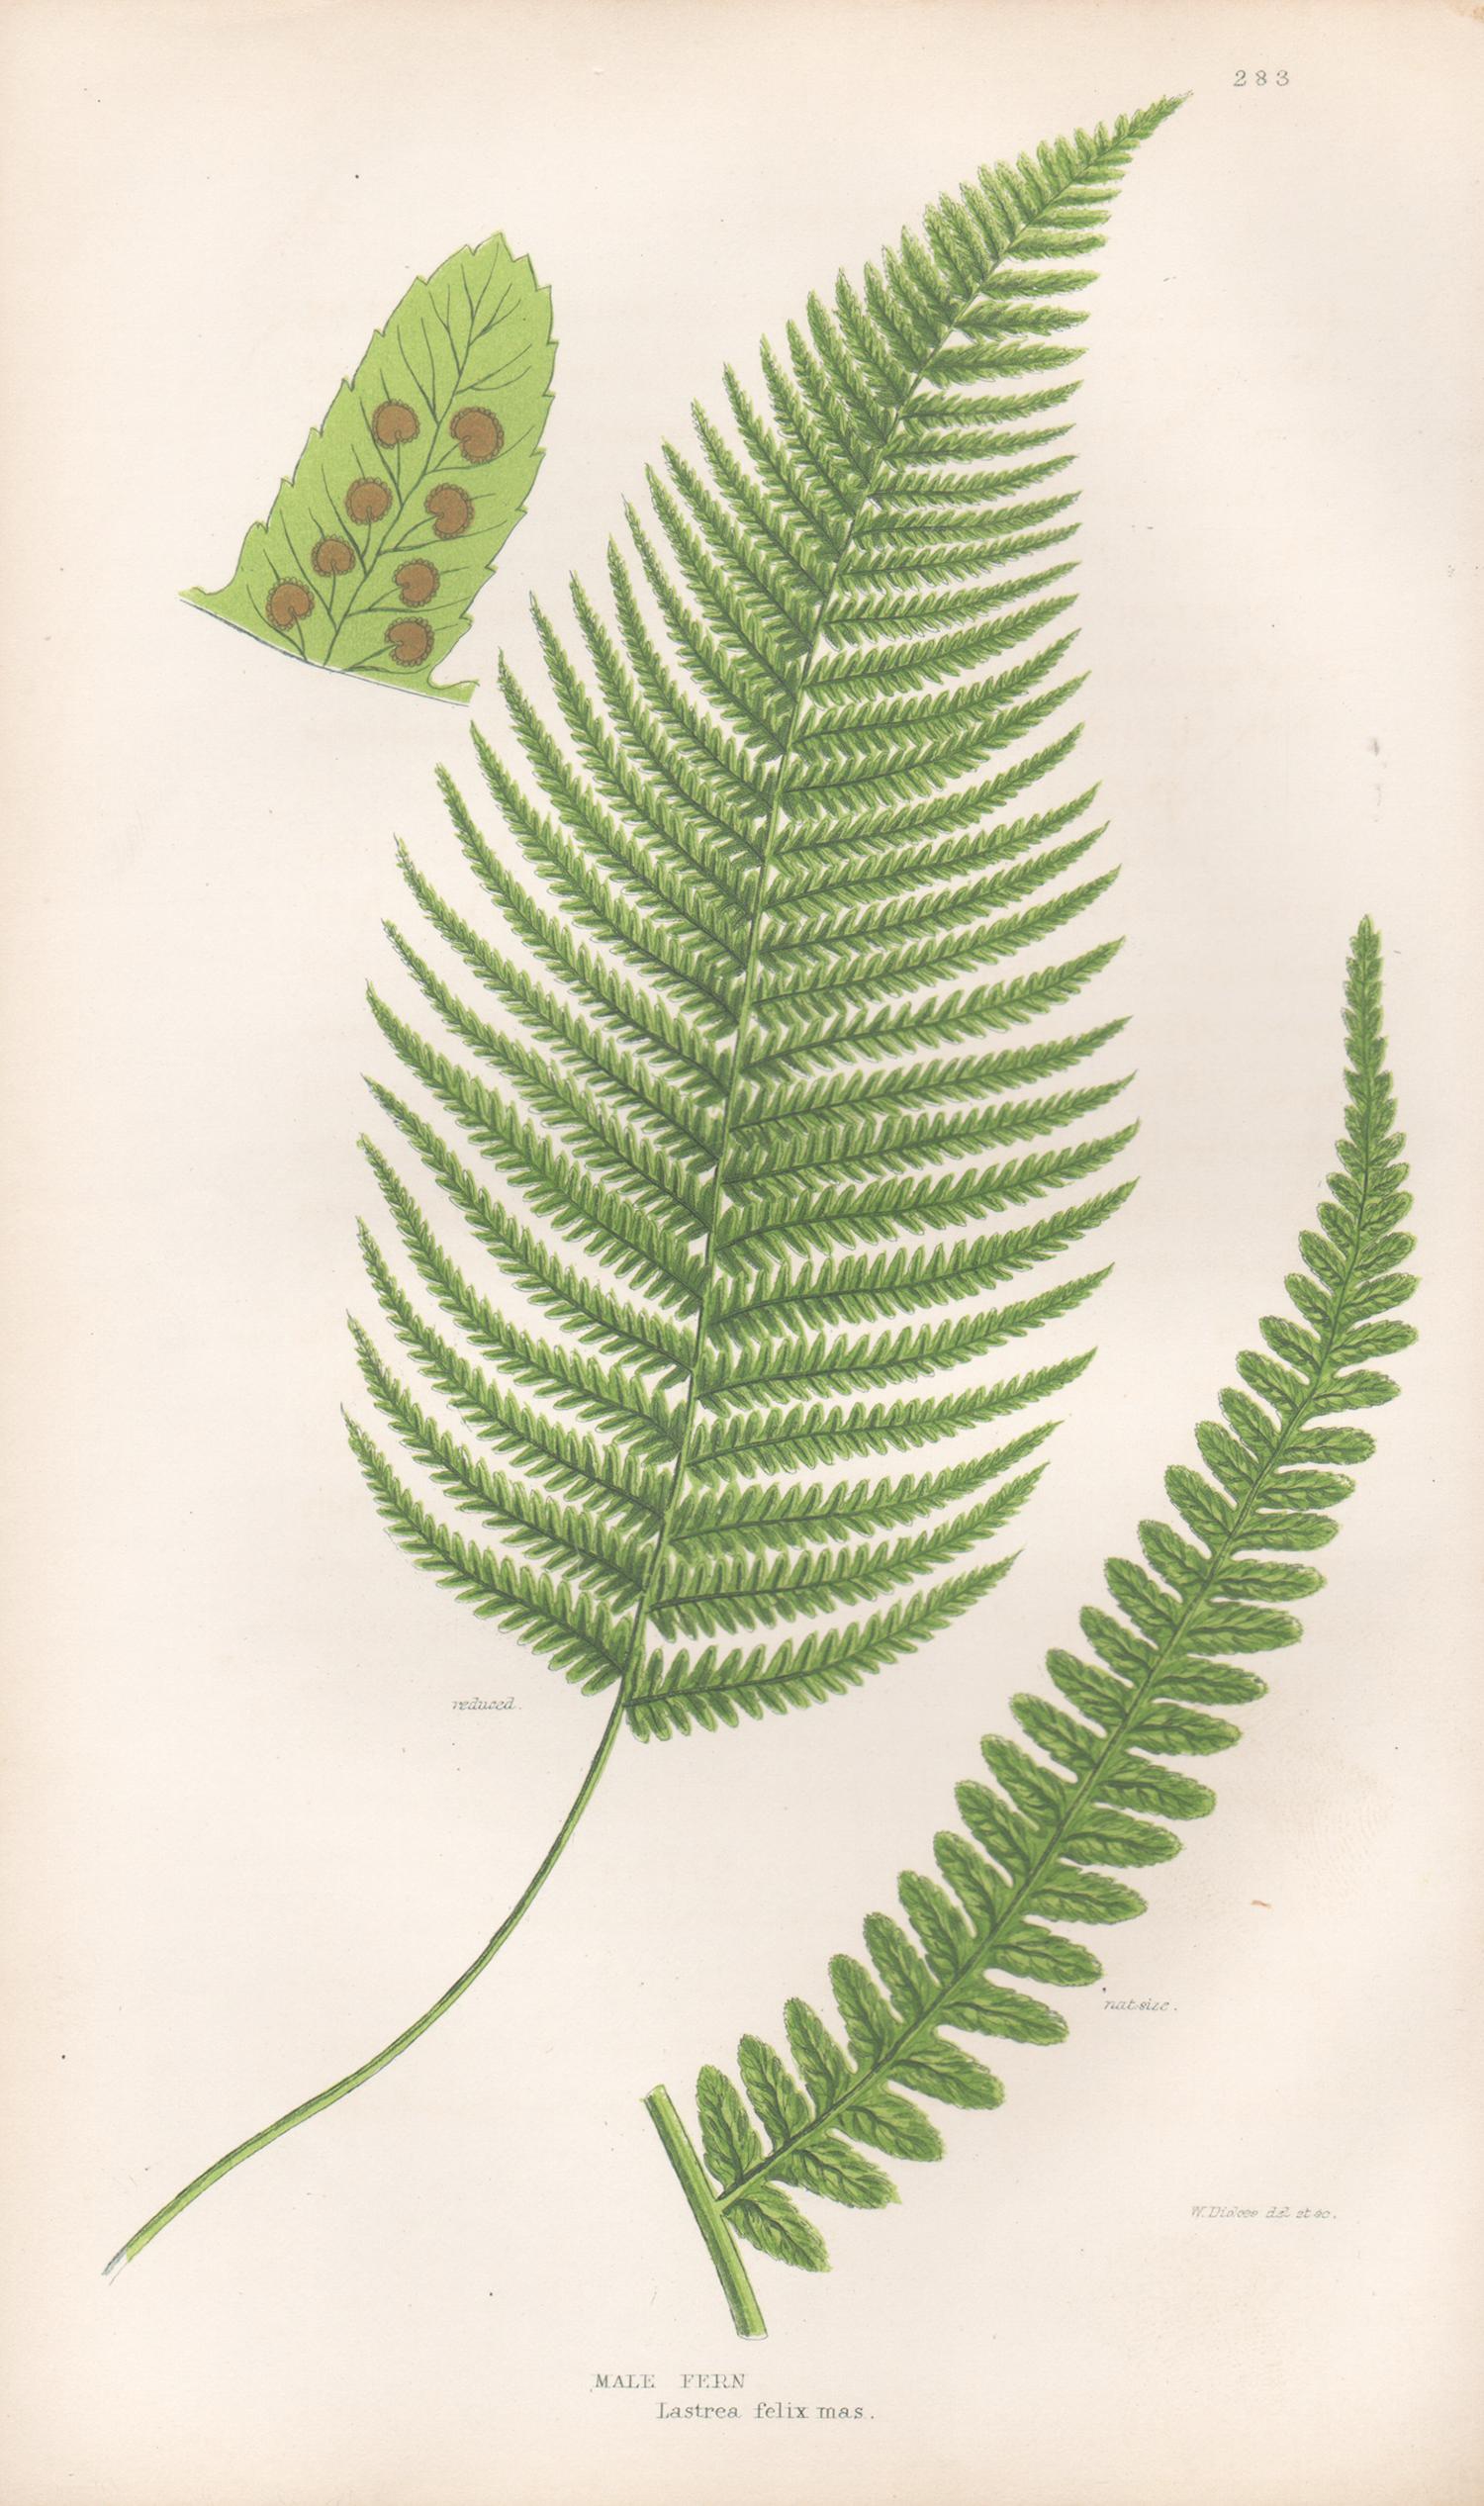 Ferns - Collection of 22 antique fern botanical woodblock prints - Naturalistic Print by William Dickes